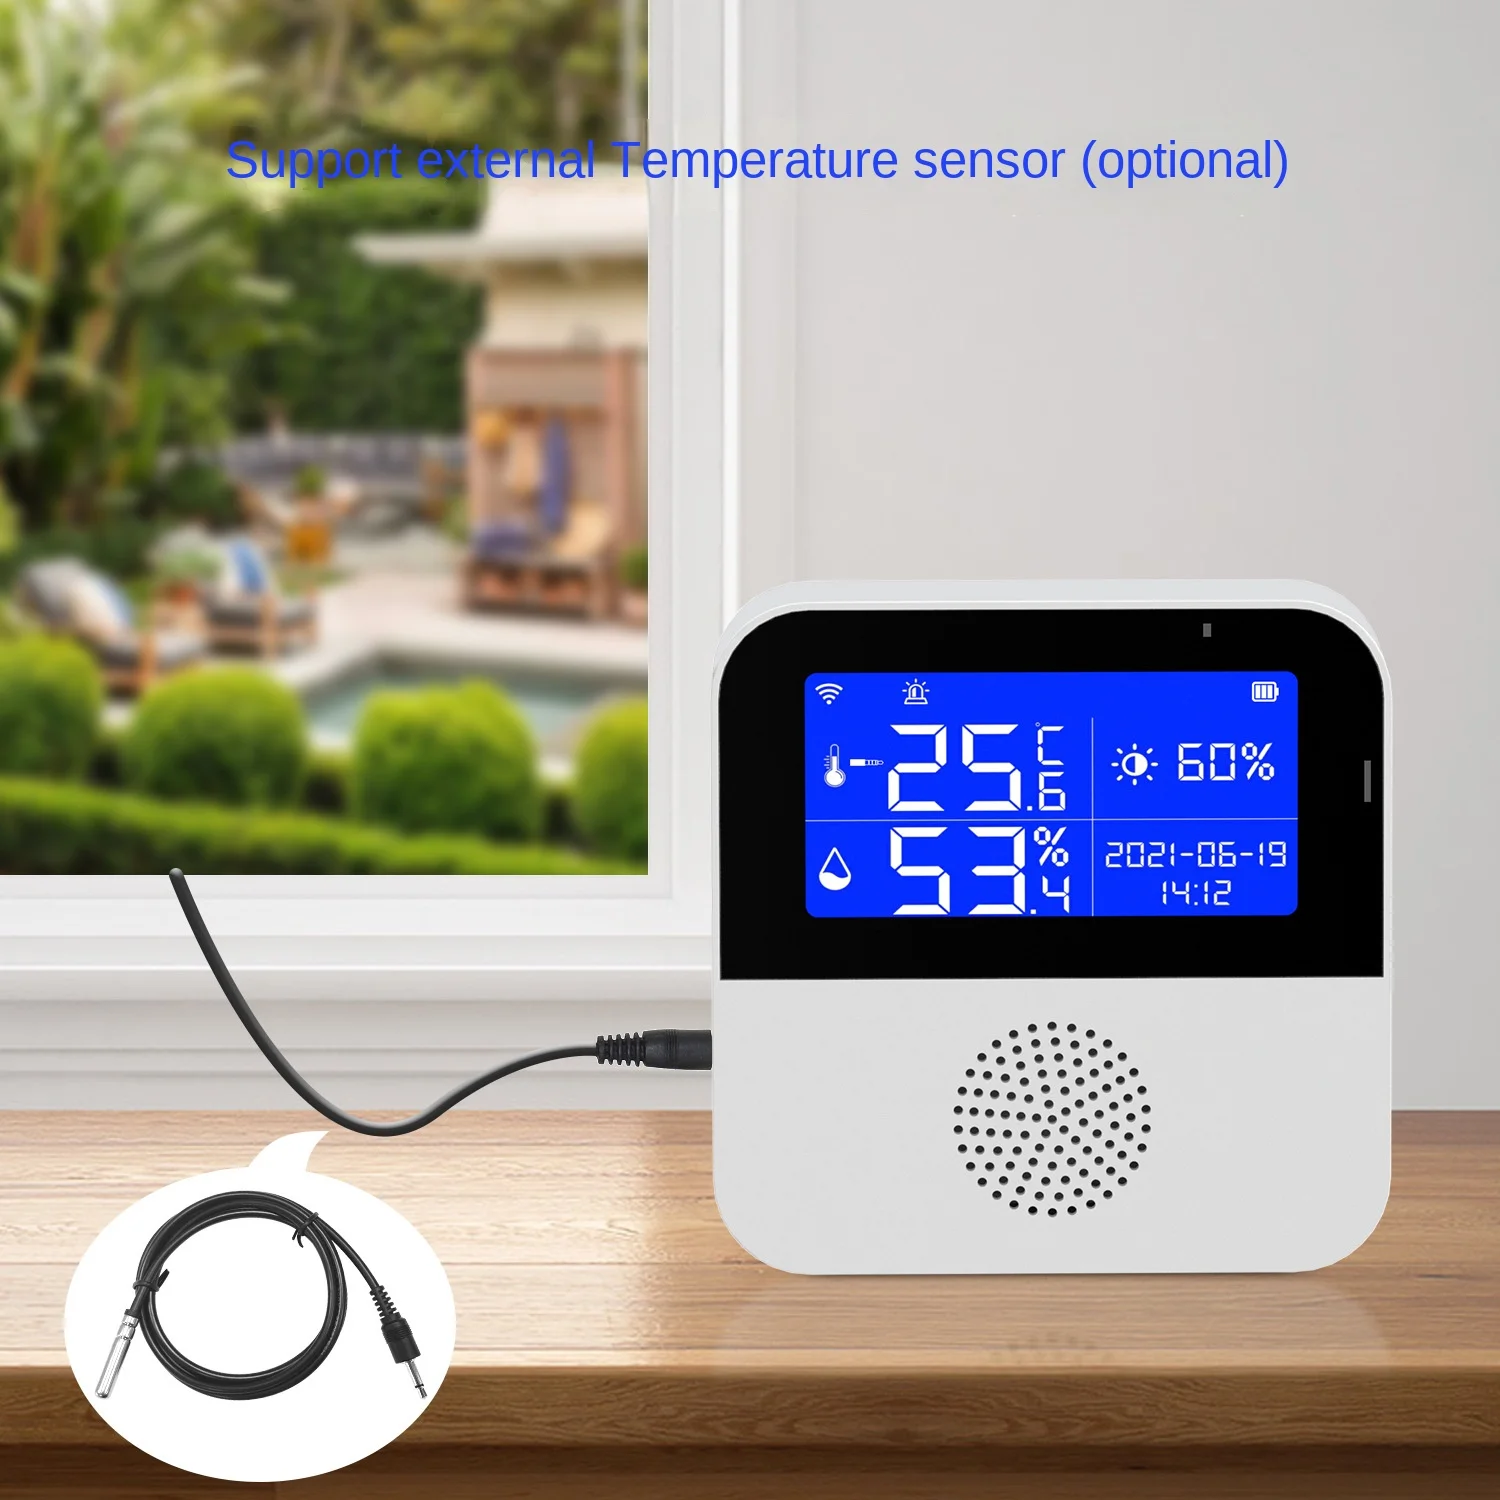 WiFi Hygrometer Thermometer Sensor with External Probe,Aquarium Thermometer, Wireless Digital Monitor Real-time sync Update, Backlight LCD,Work with  Tuya app,for Home Greenhouse,Fish Tank, Refrigerator